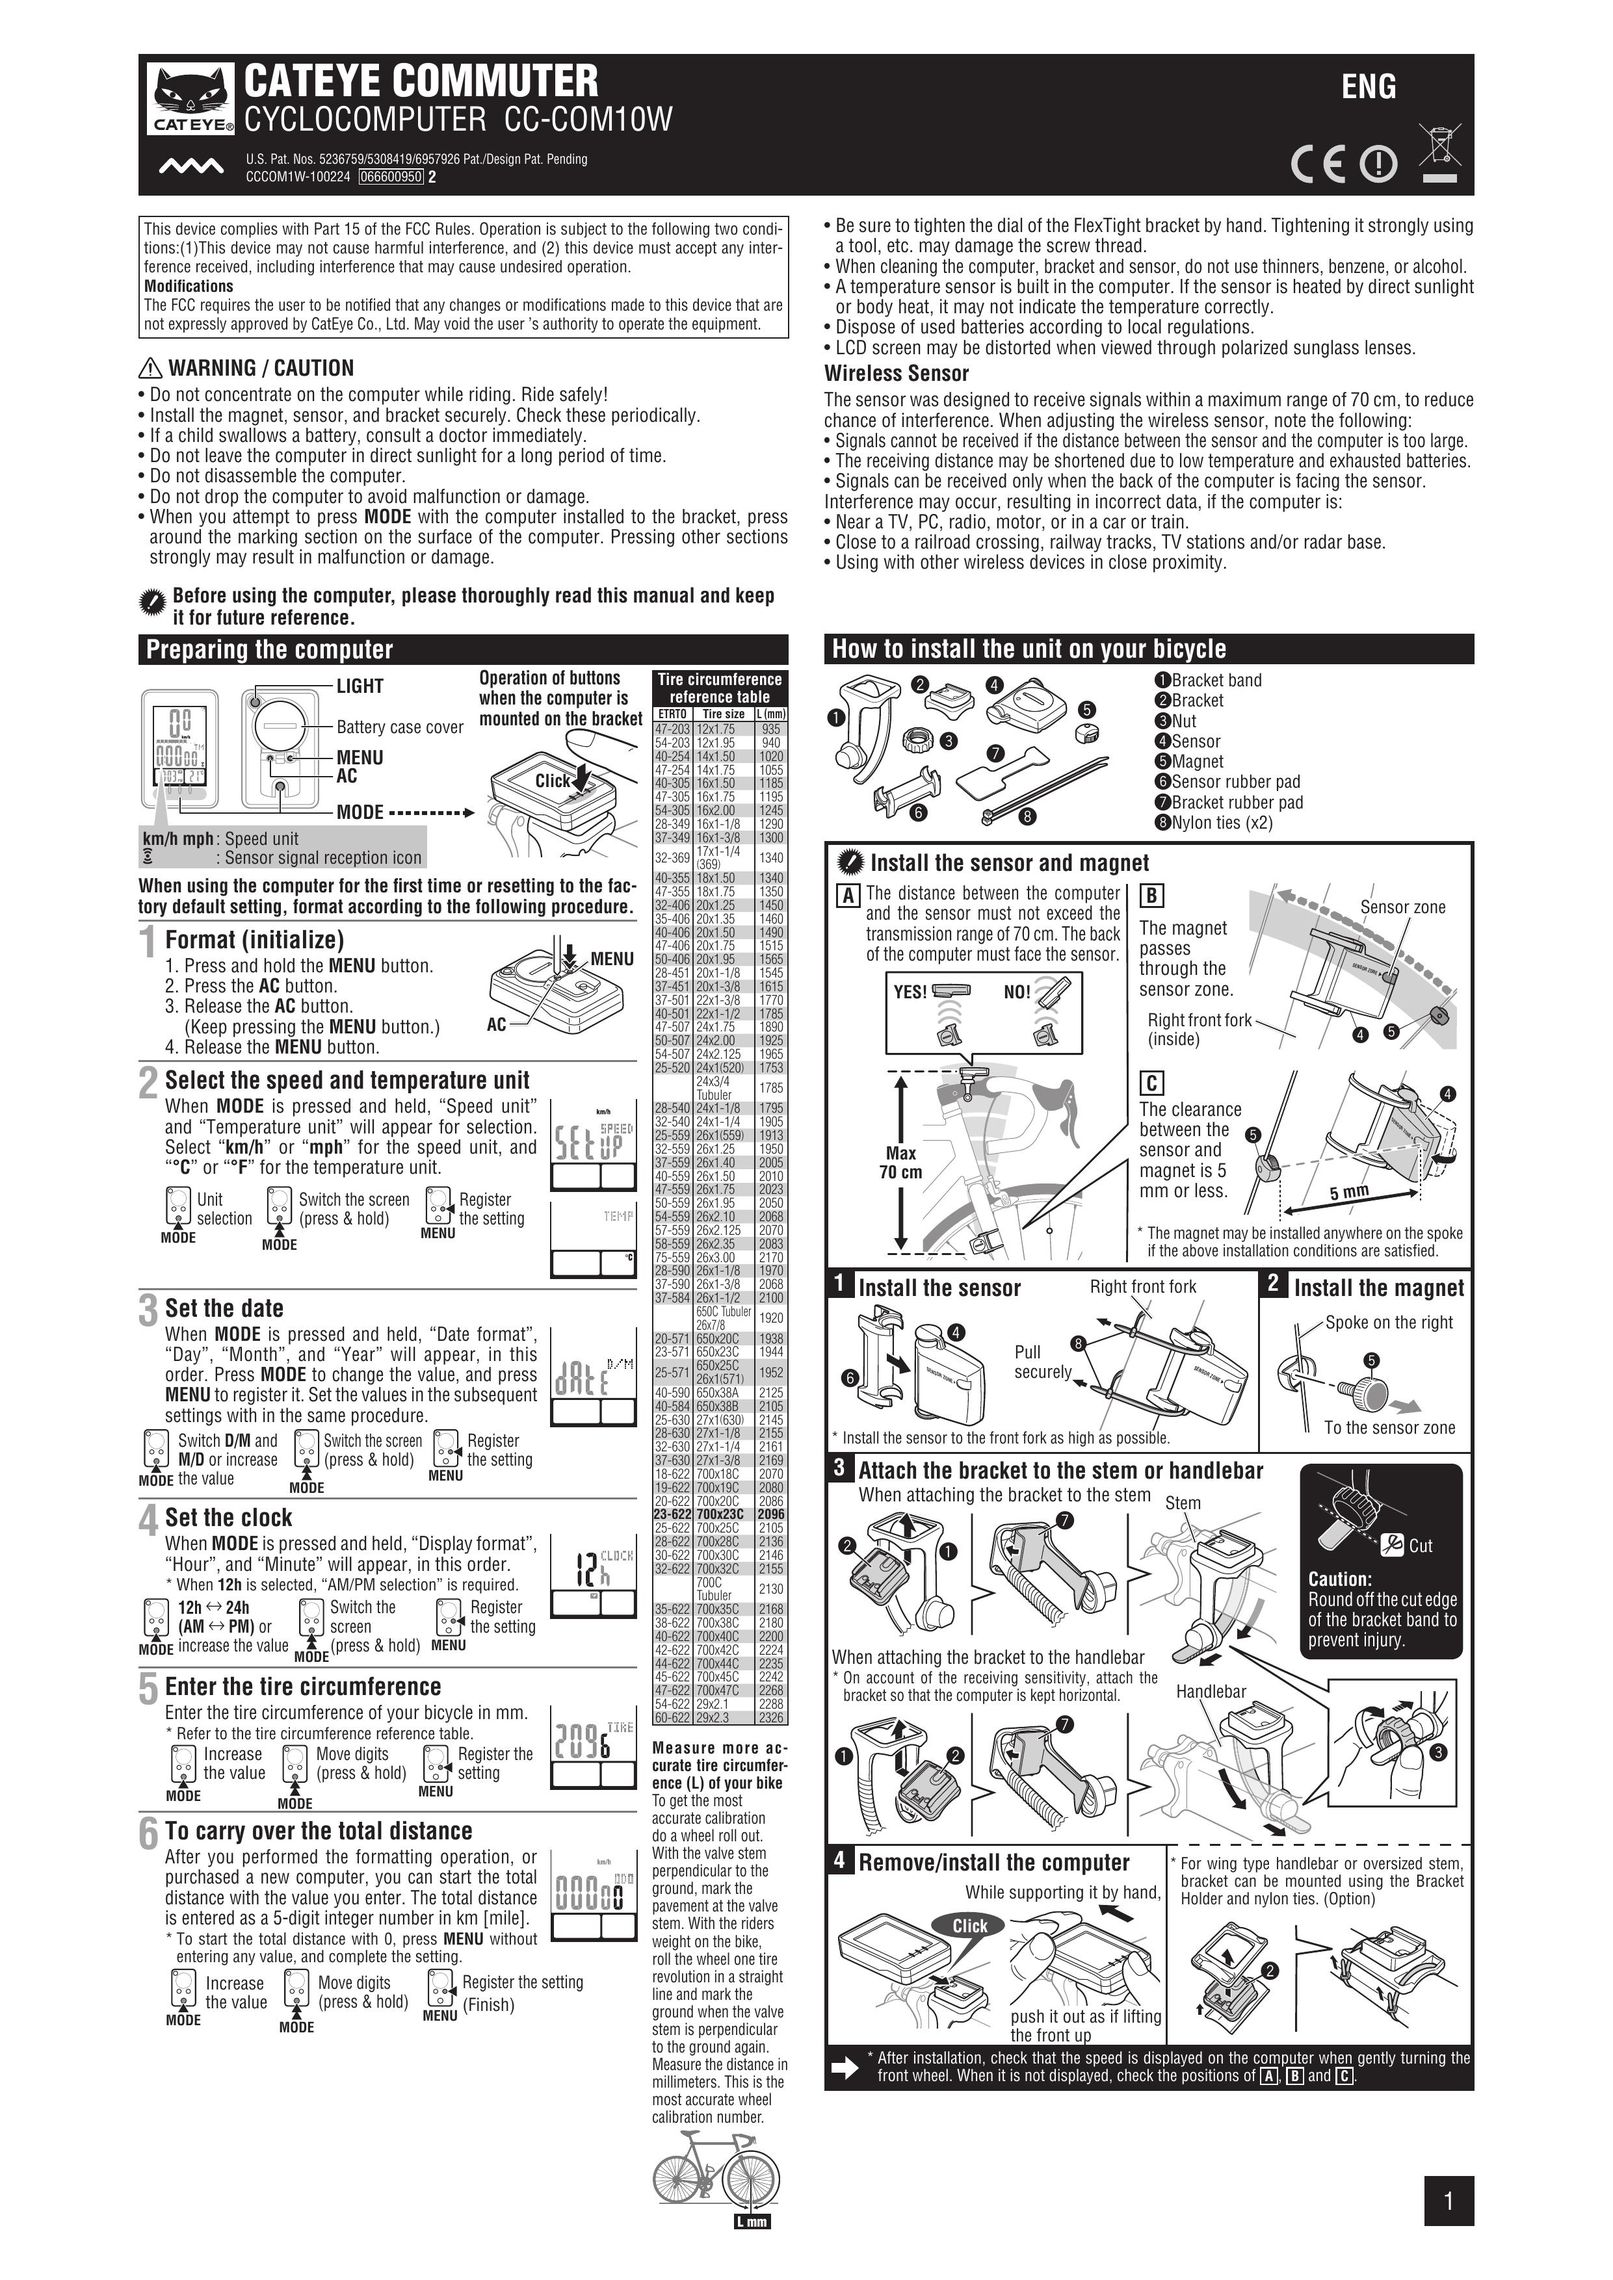 Cateye CC-COM10W Bicycle Accessories User Manual (Page 1)